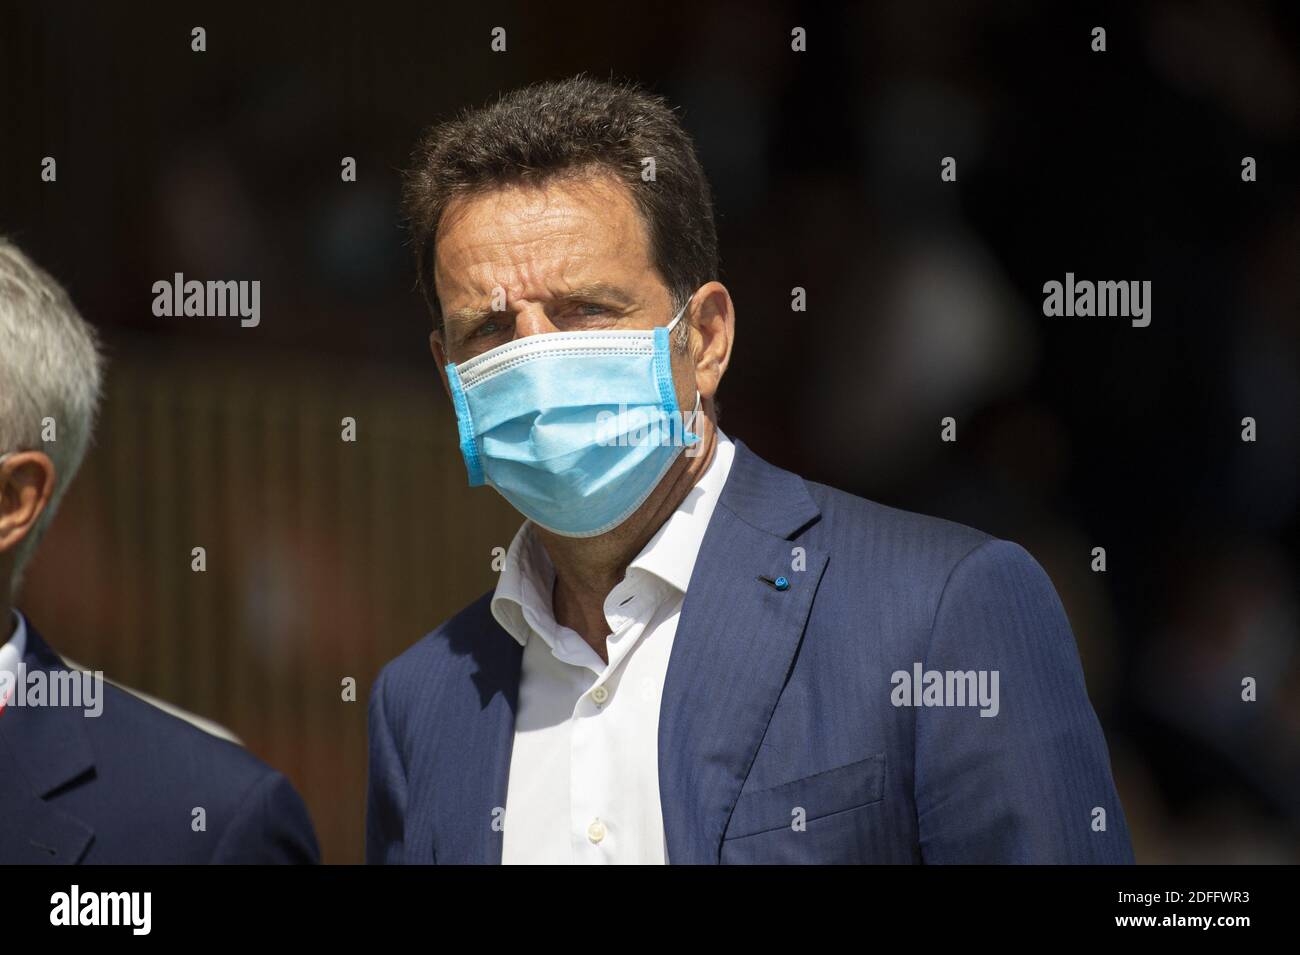 French Employers' association (Medef) President Geoffroy Roux de Bezieux and MEDEF Vice President Patrick Martin, wearing protective face masks attends at the Medef themed 'The Renaissance of French Companies', at the Paris Longchamp Racecourse in Paris, on August 26, 2020.Photo by Eliot Blondet/ABACAPRESS.COM Stock Photo